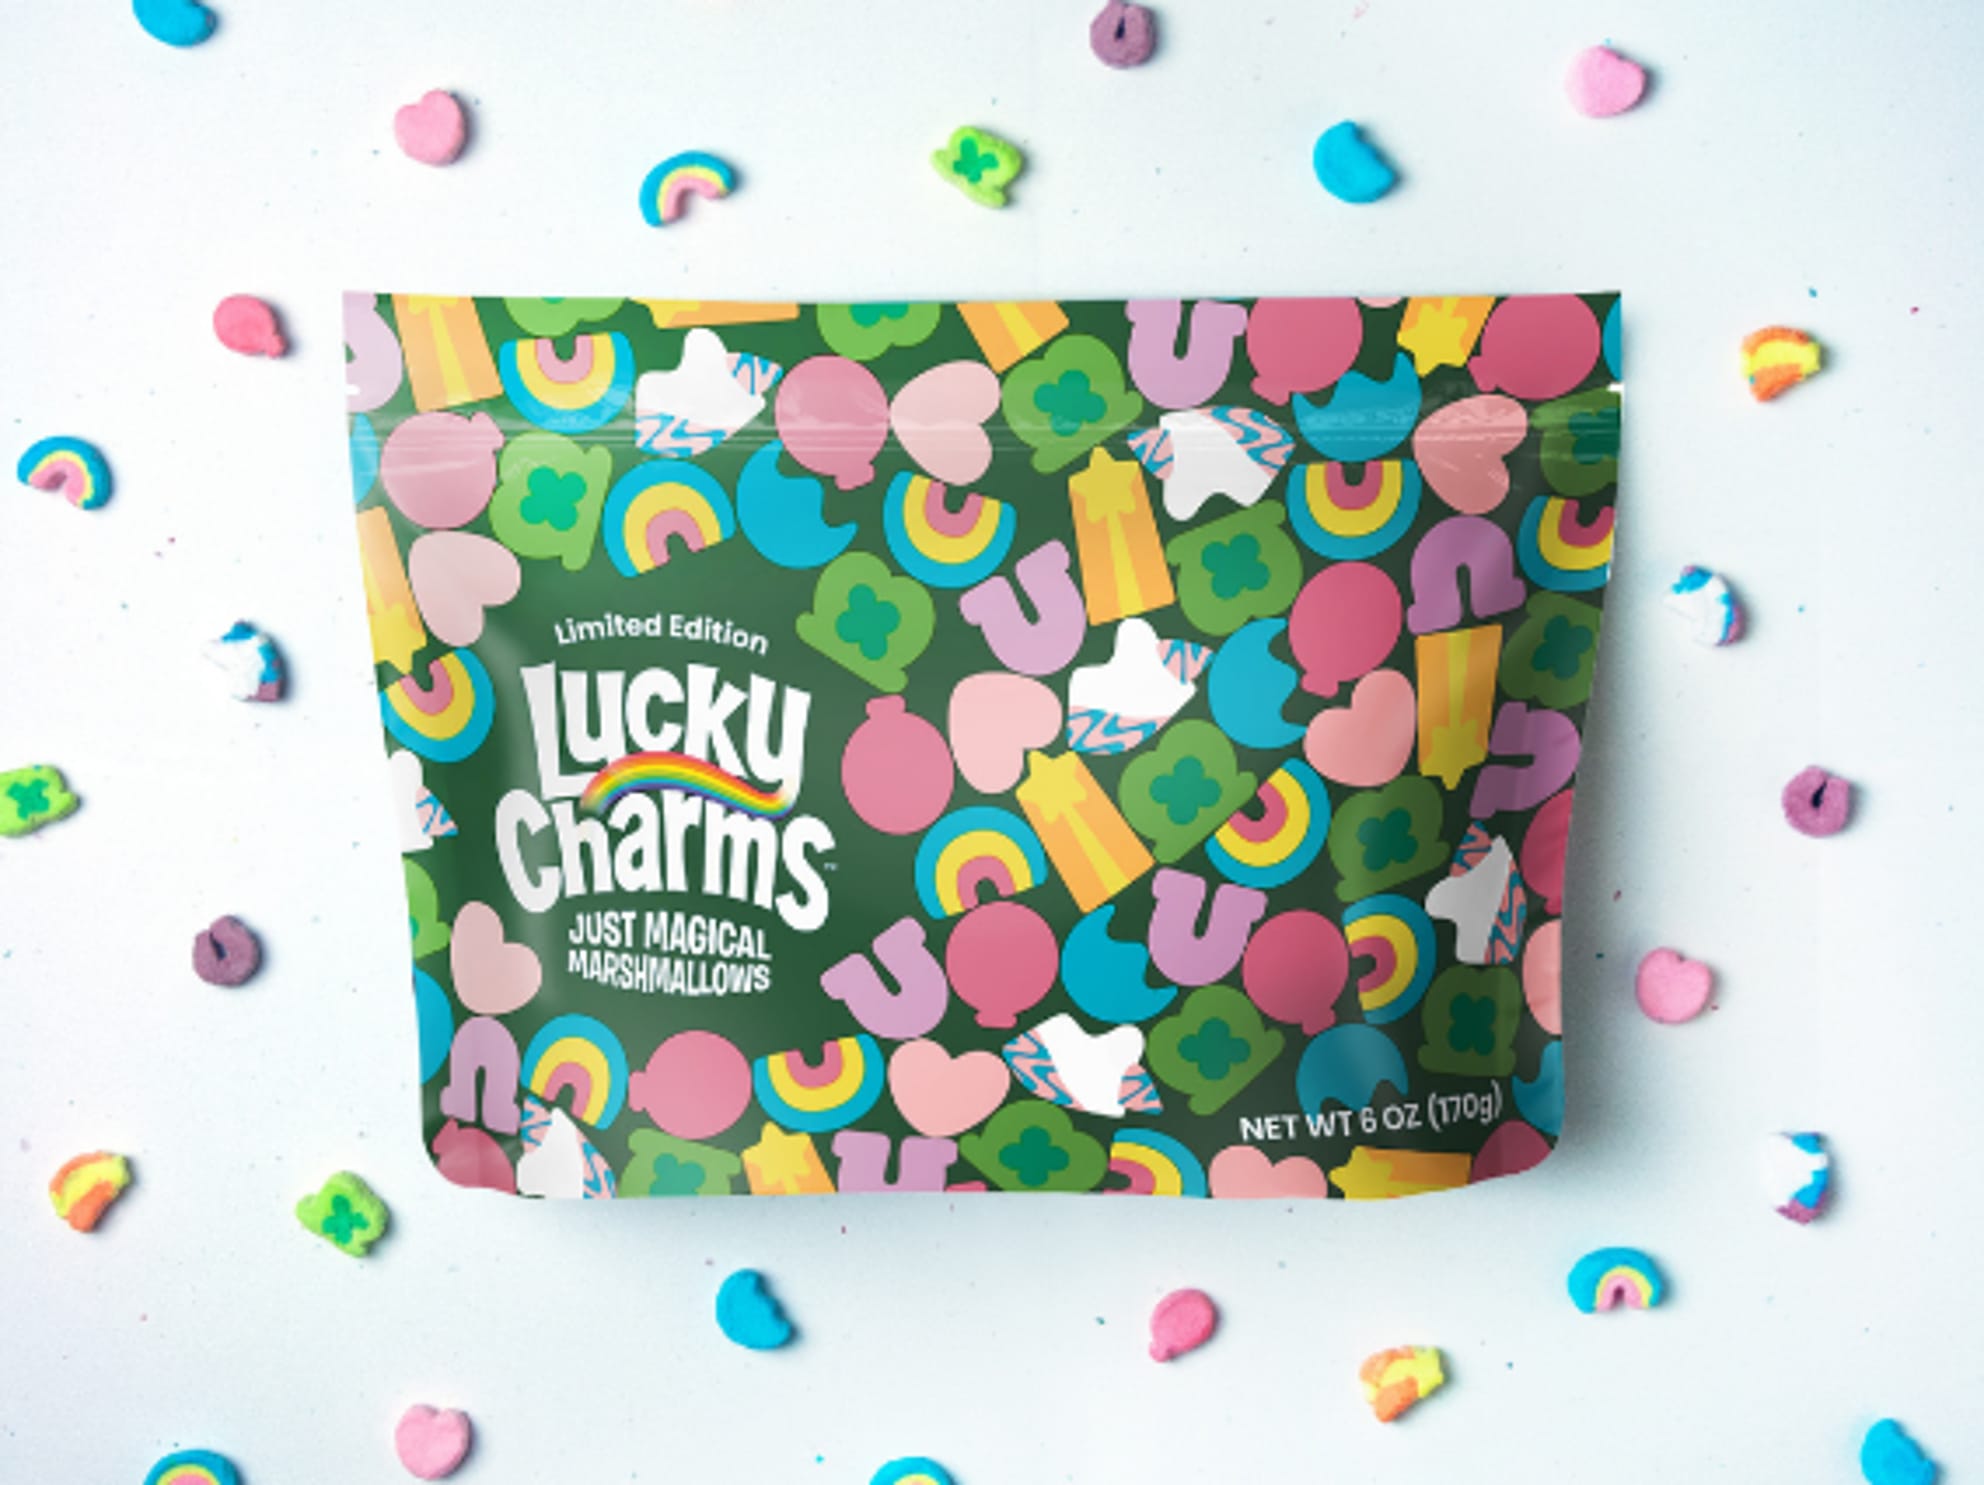 Lucky Charms fans unlock Just Magical Marshmallows - General Mills